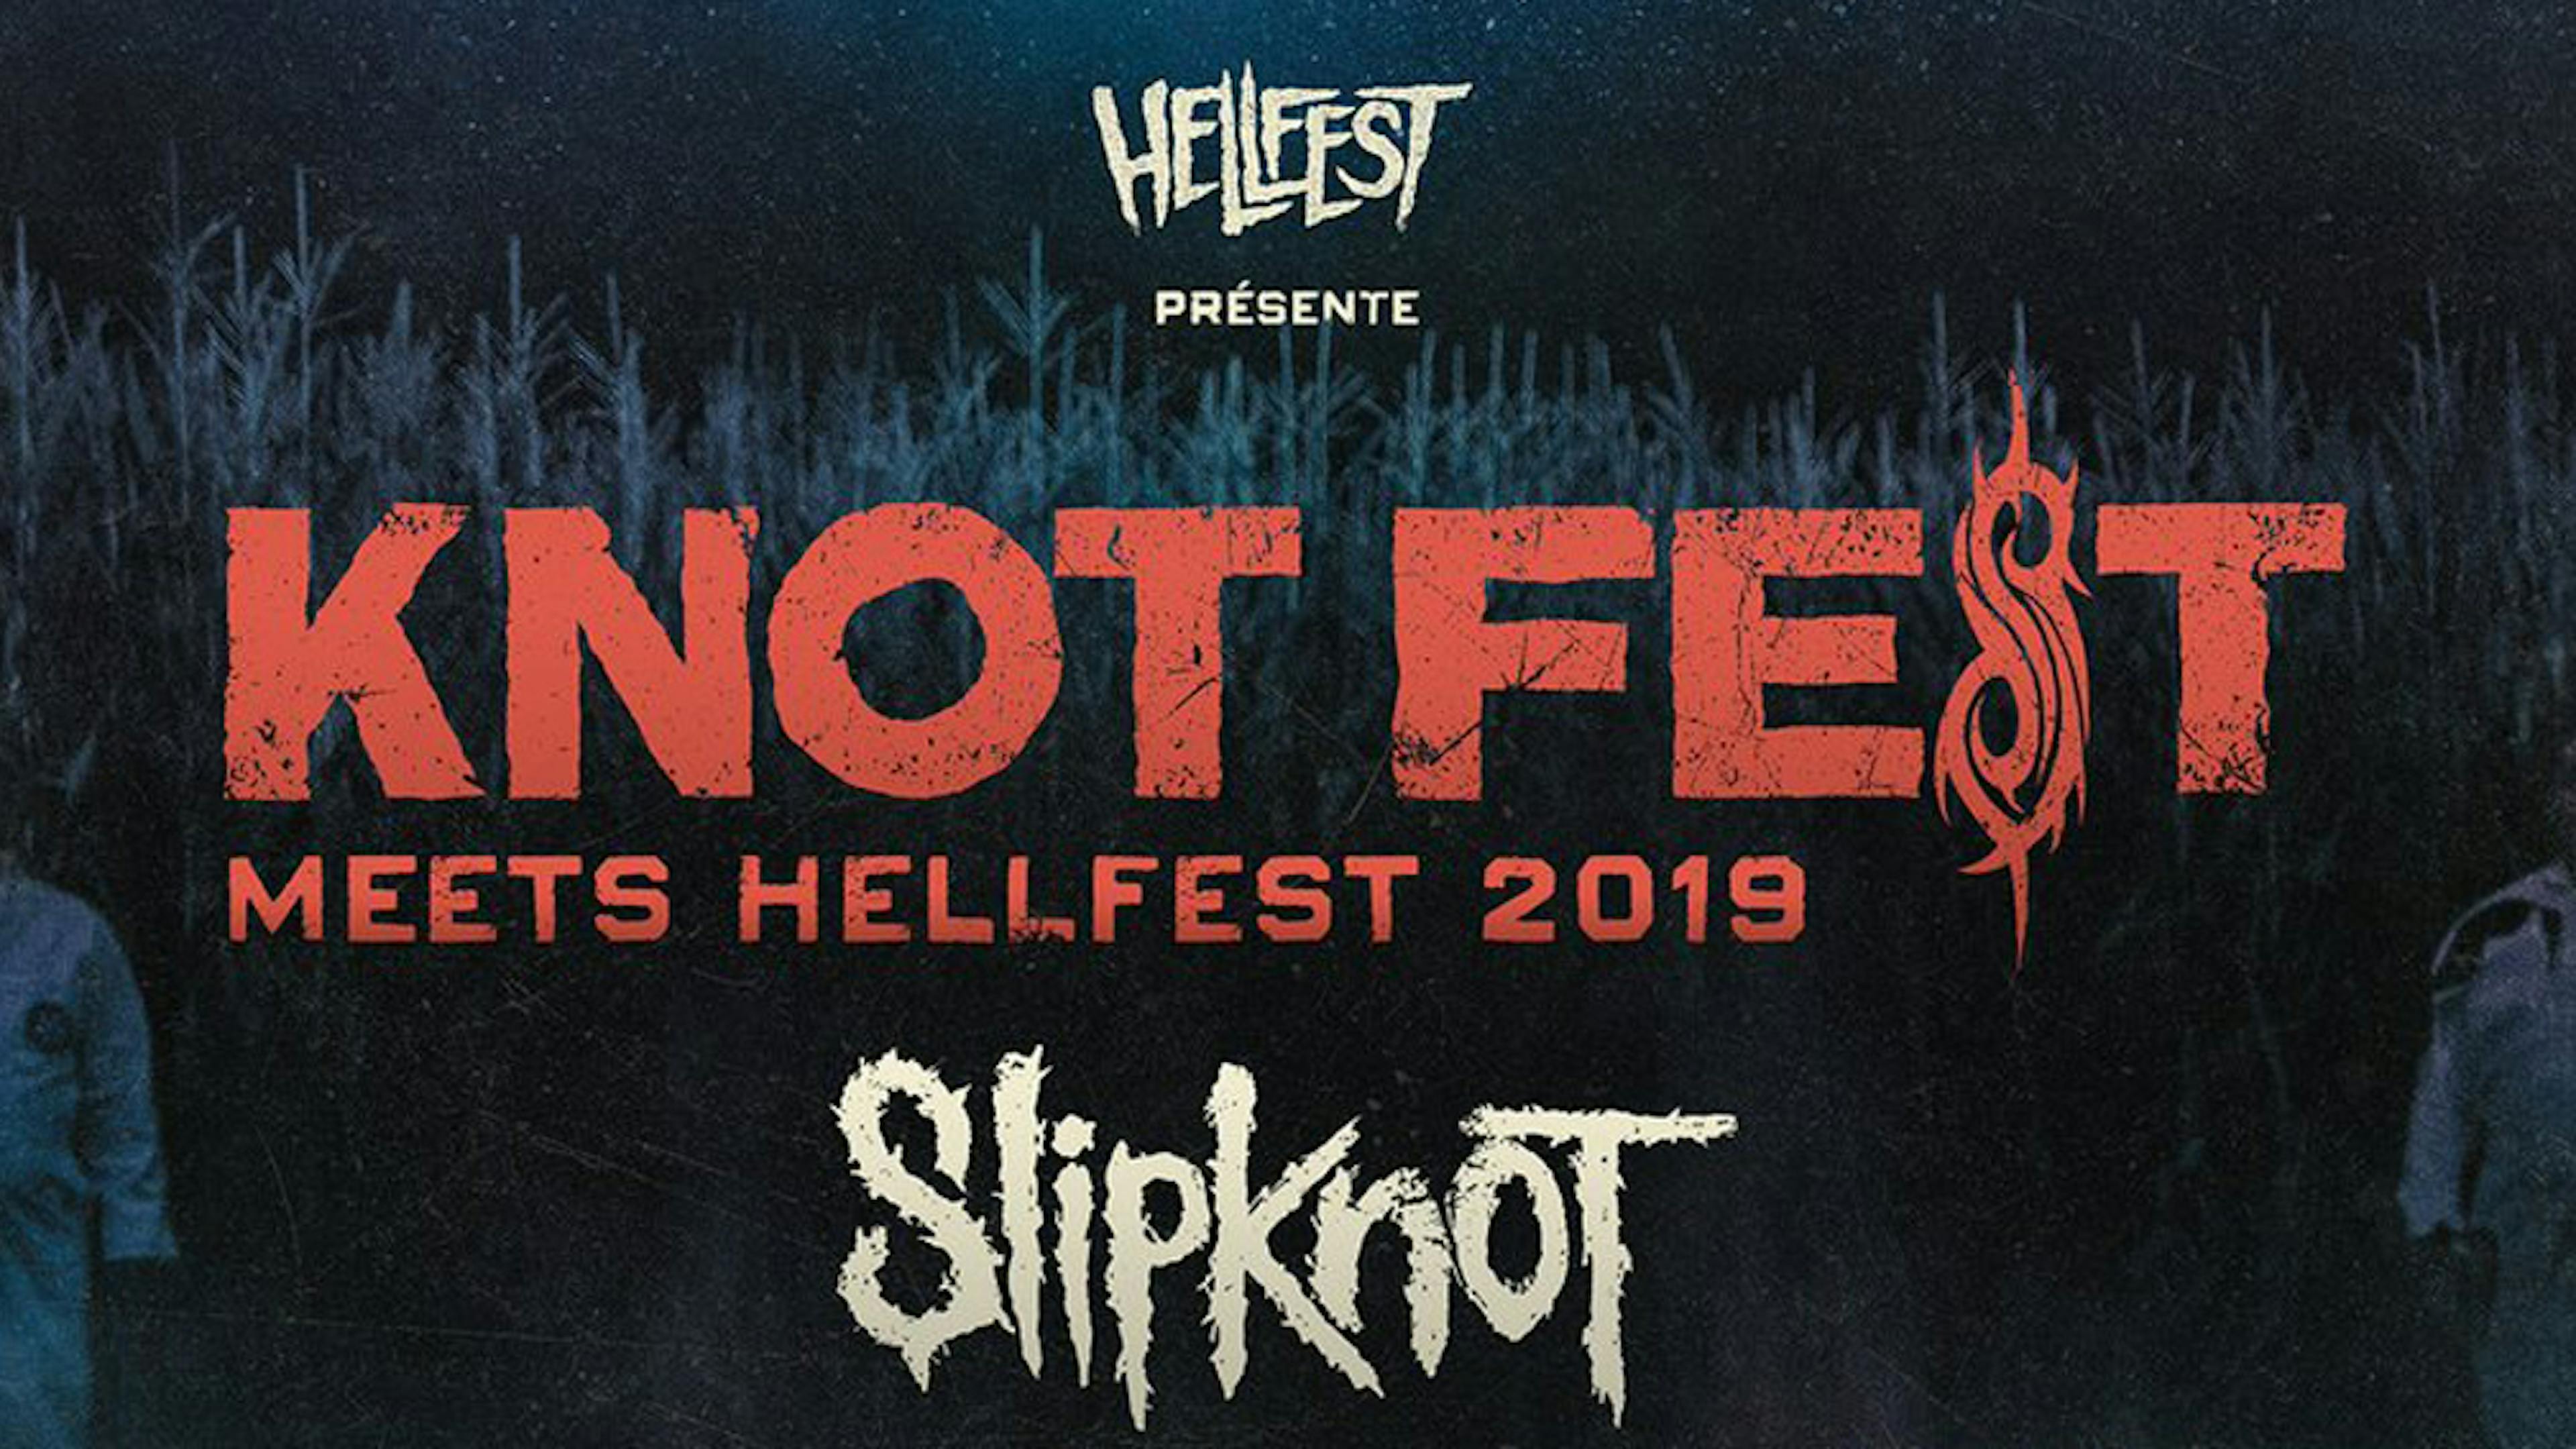 Slipknot, Rob Zombie, Behemoth And More To Play Knotfest Meets Hellfest